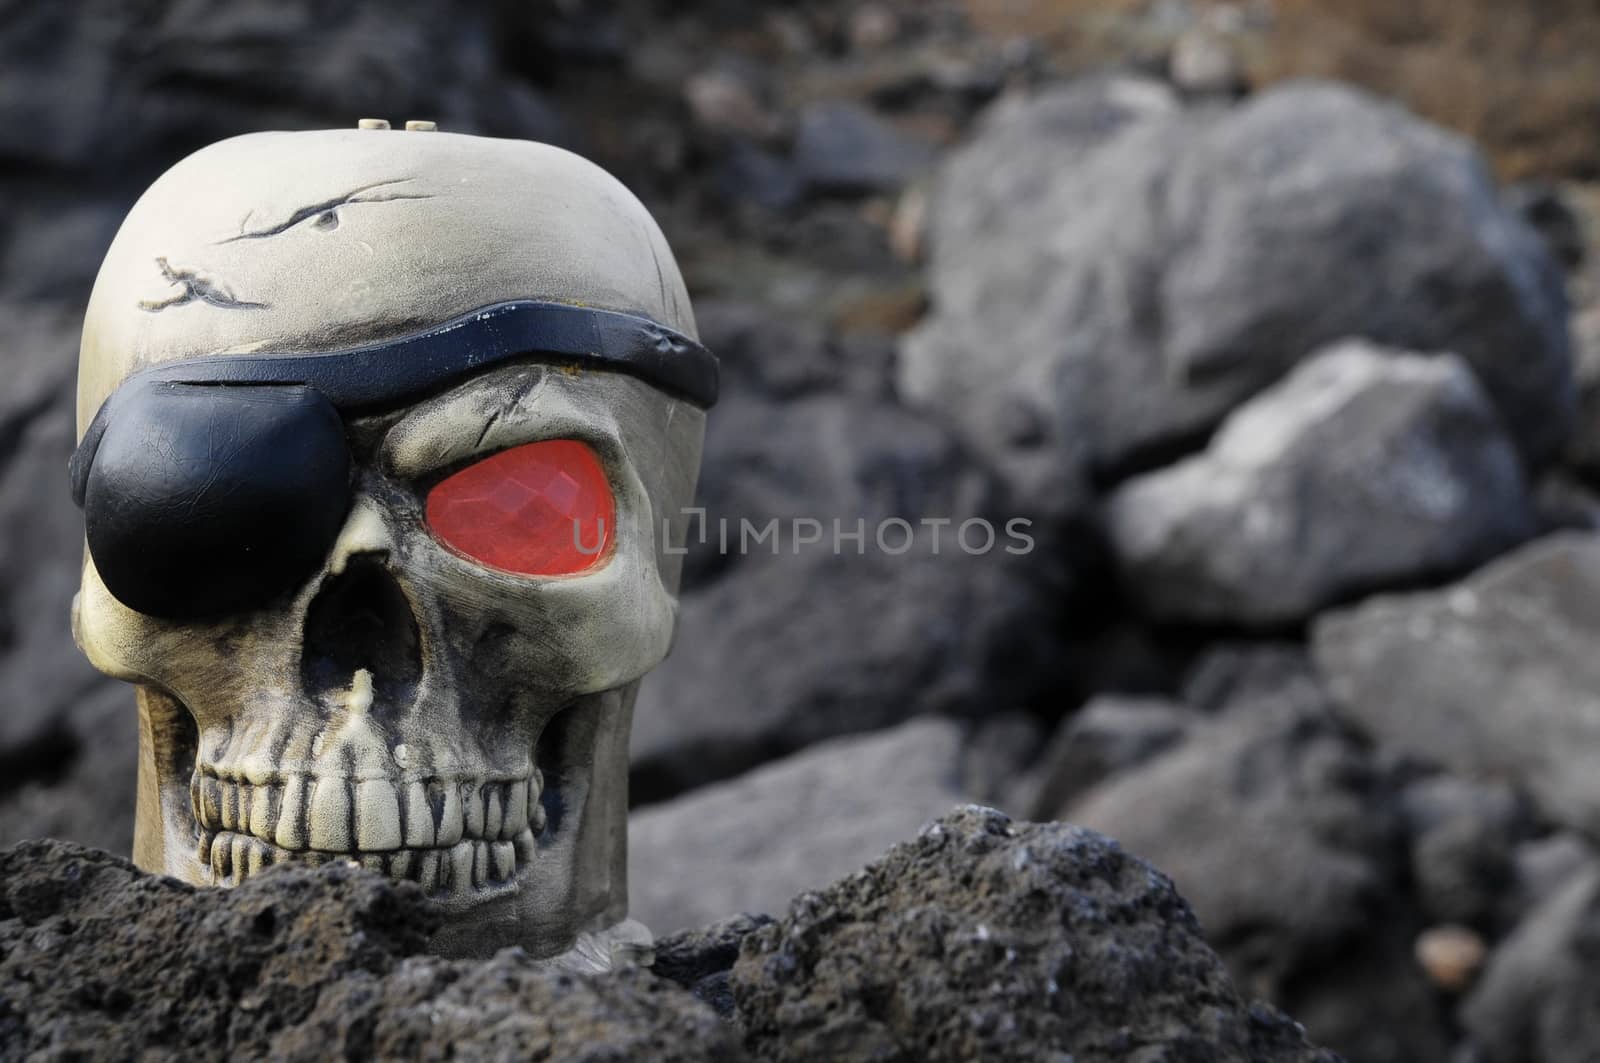 One Pirate Skull with a Red Eye and a Patch